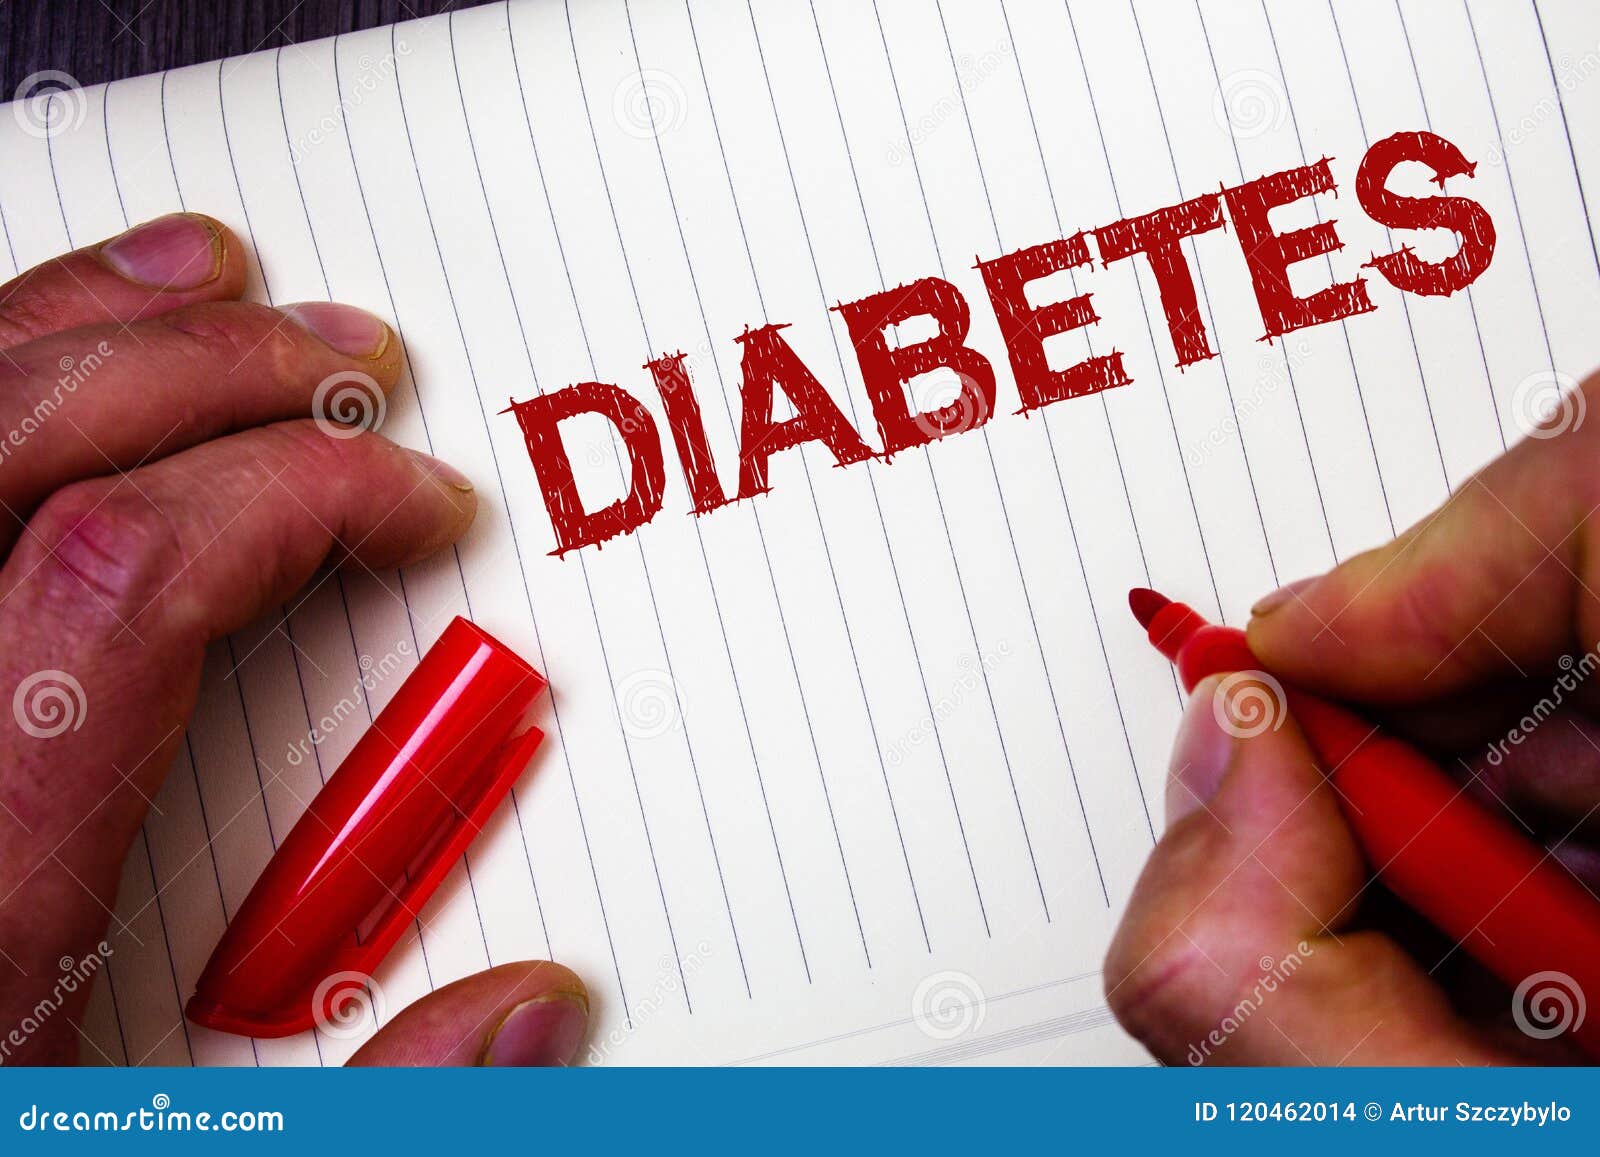 Diabetes A Disease Characterized By High Levels